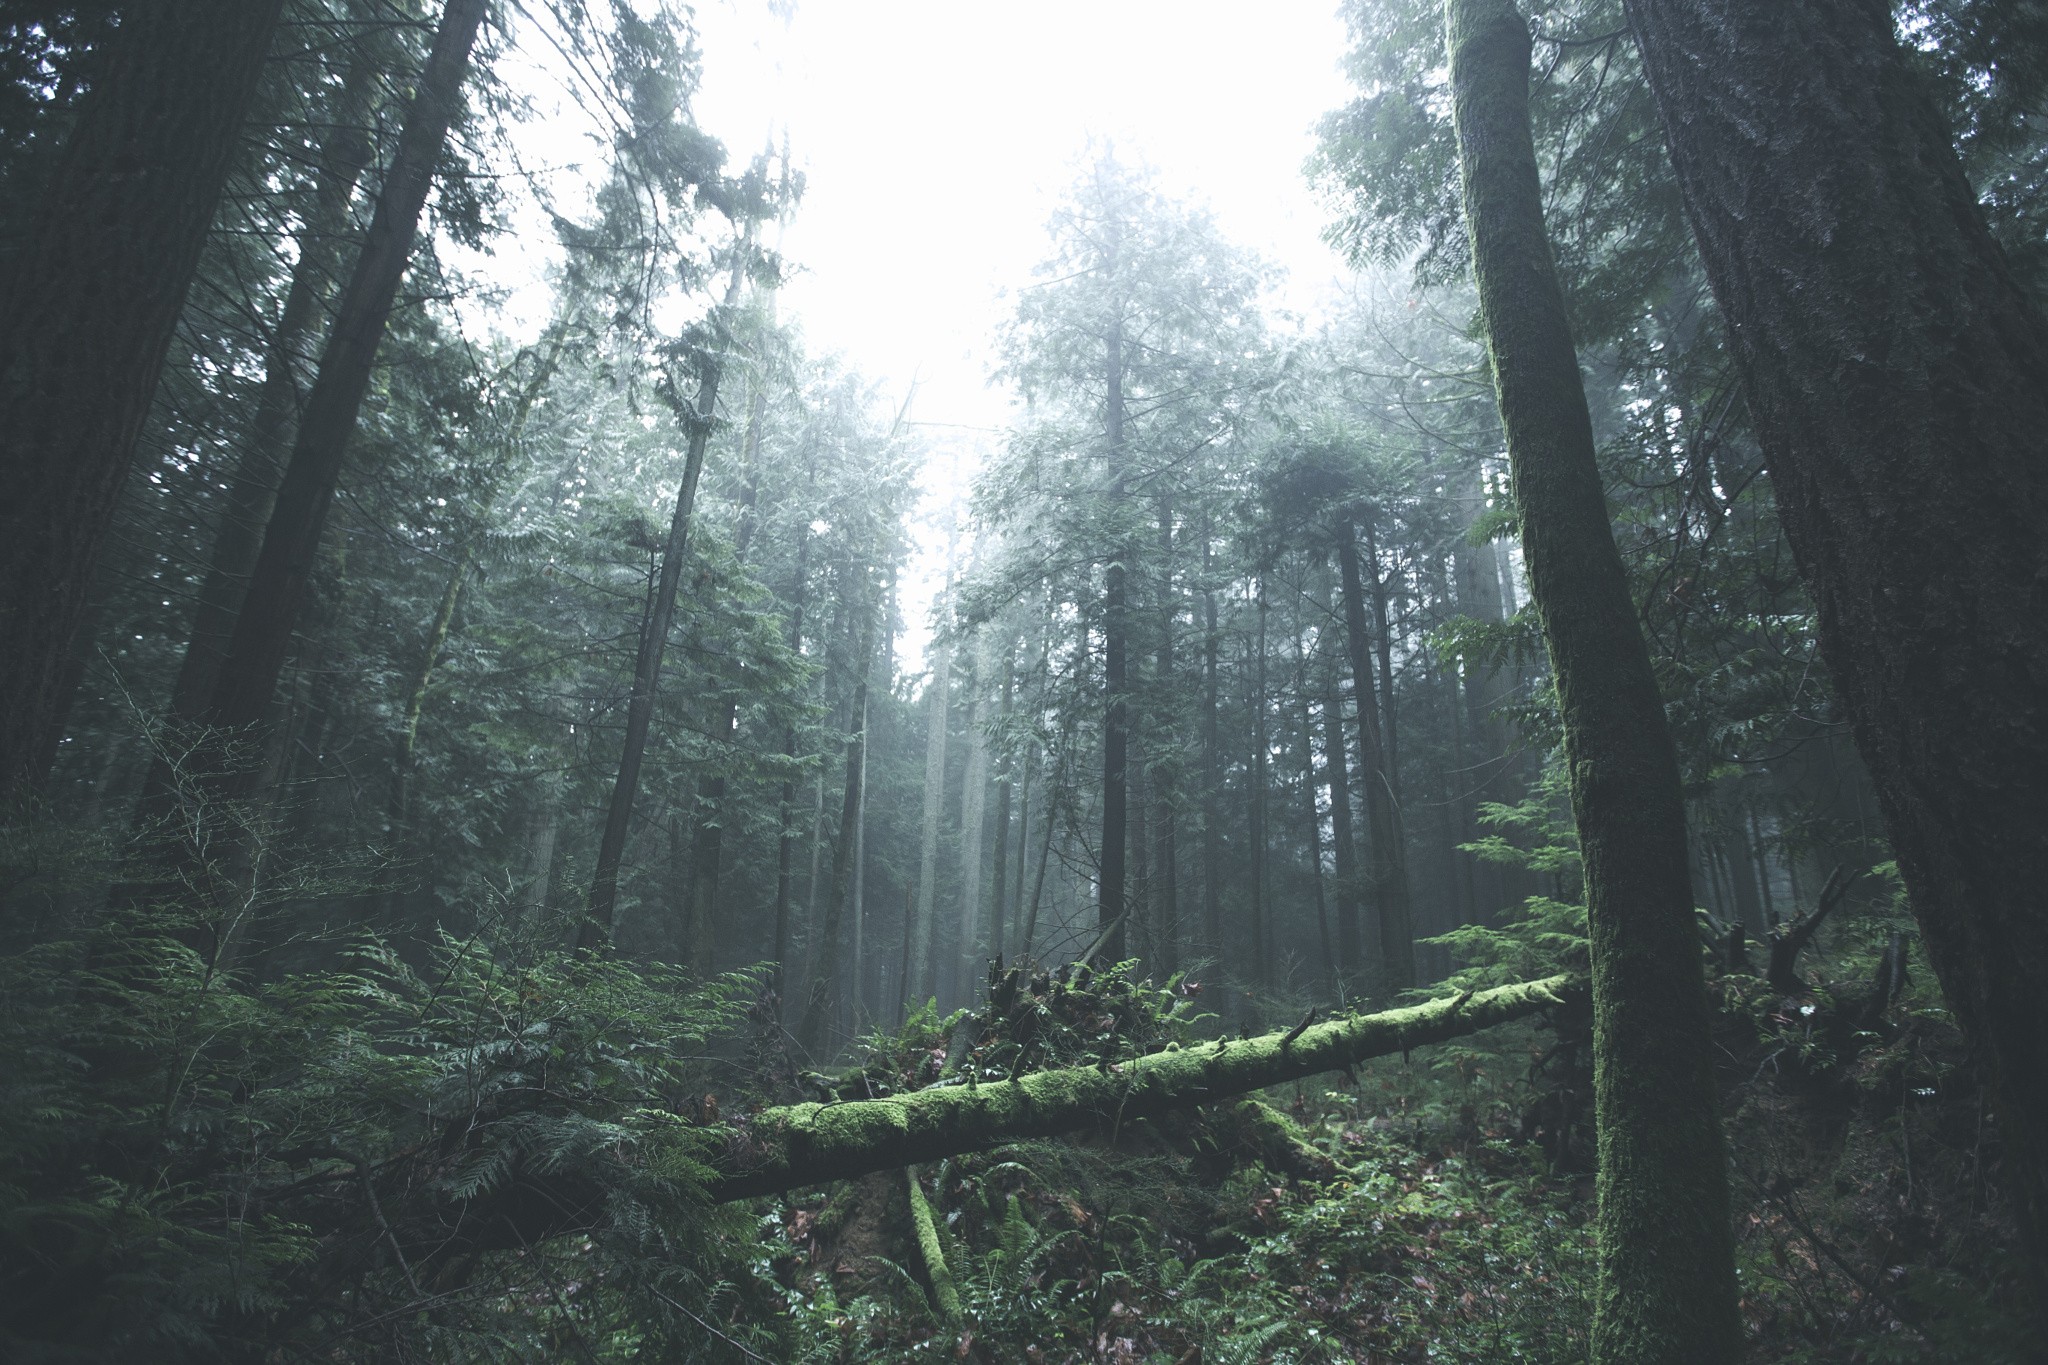 General 2048x1365 trees forest mist nature